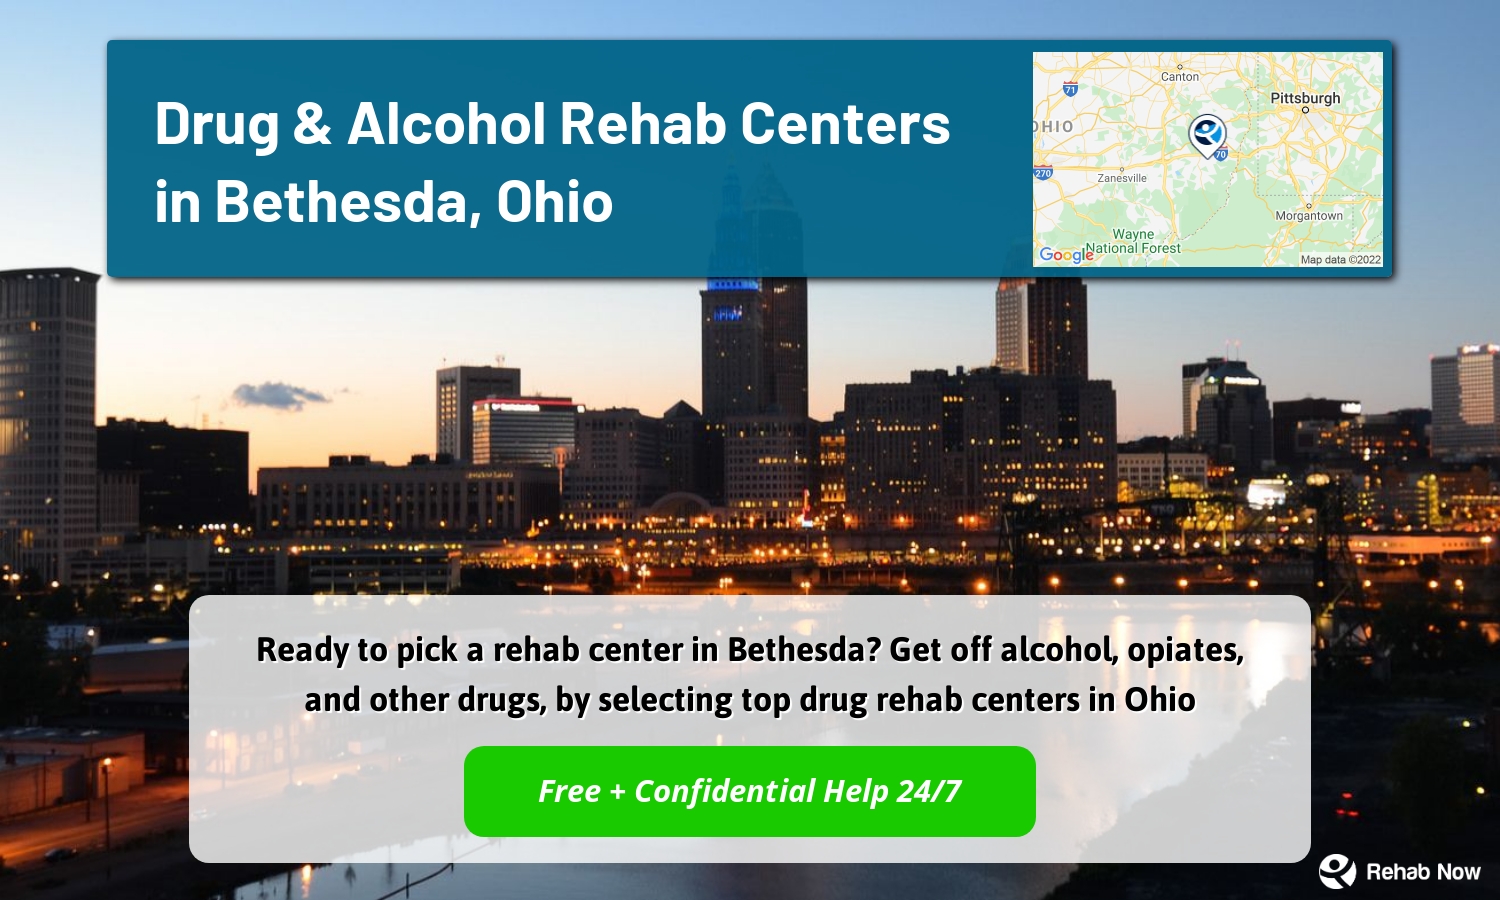 Ready to pick a rehab center in Bethesda? Get off alcohol, opiates, and other drugs, by selecting top drug rehab centers in Ohio